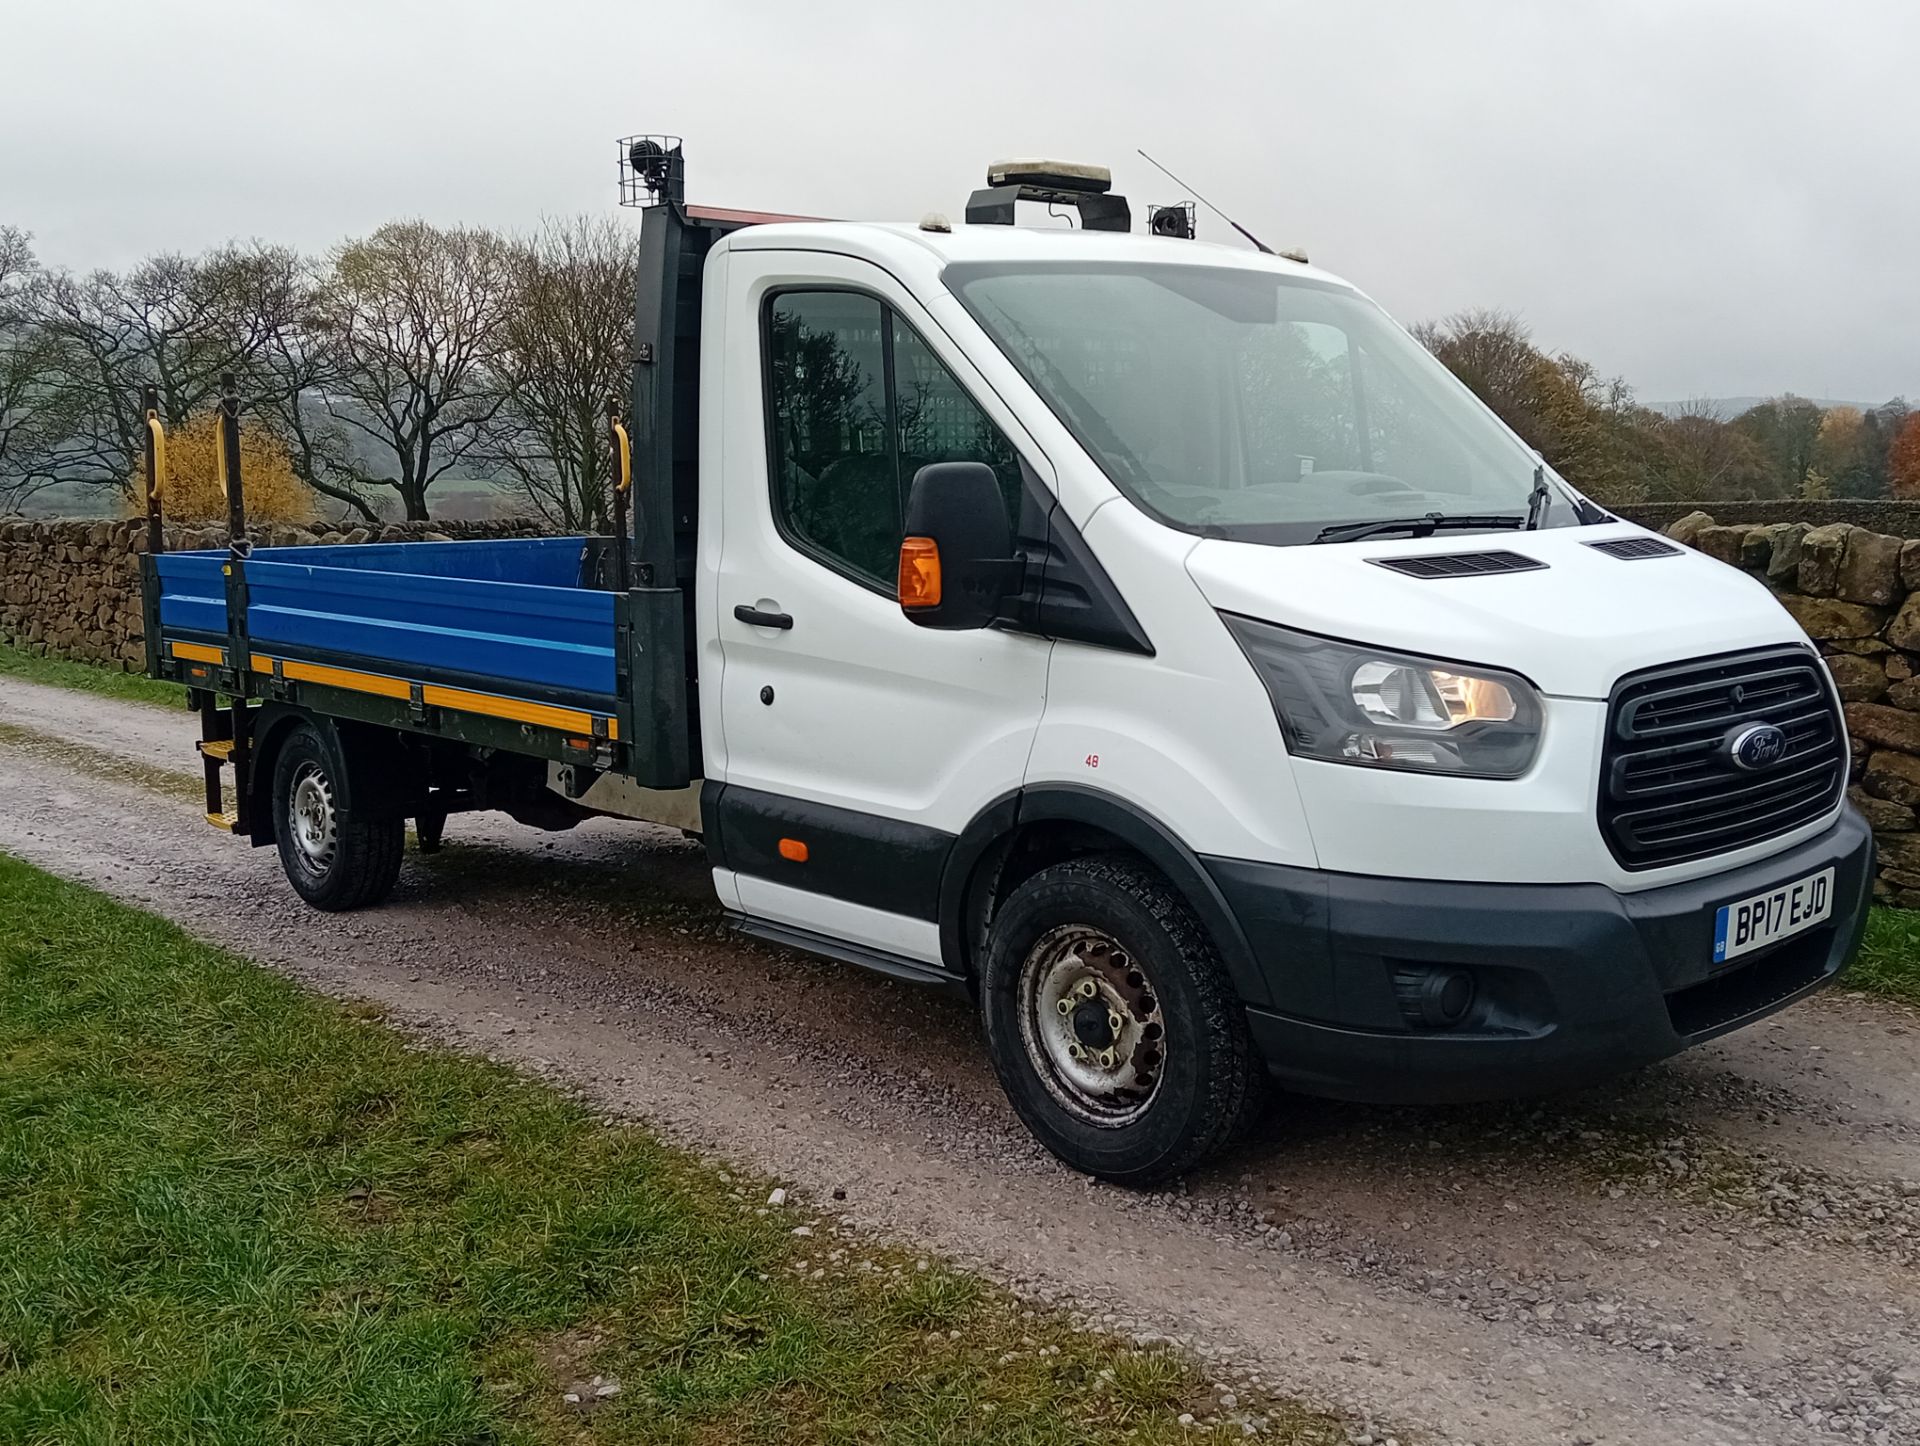 2017 FORD TRANSIT 2.0 ECOBLUE DROPSIDE - 159,000 MILES - EURO 6 - JUST SERVICED - TOW BAR. - Image 2 of 8